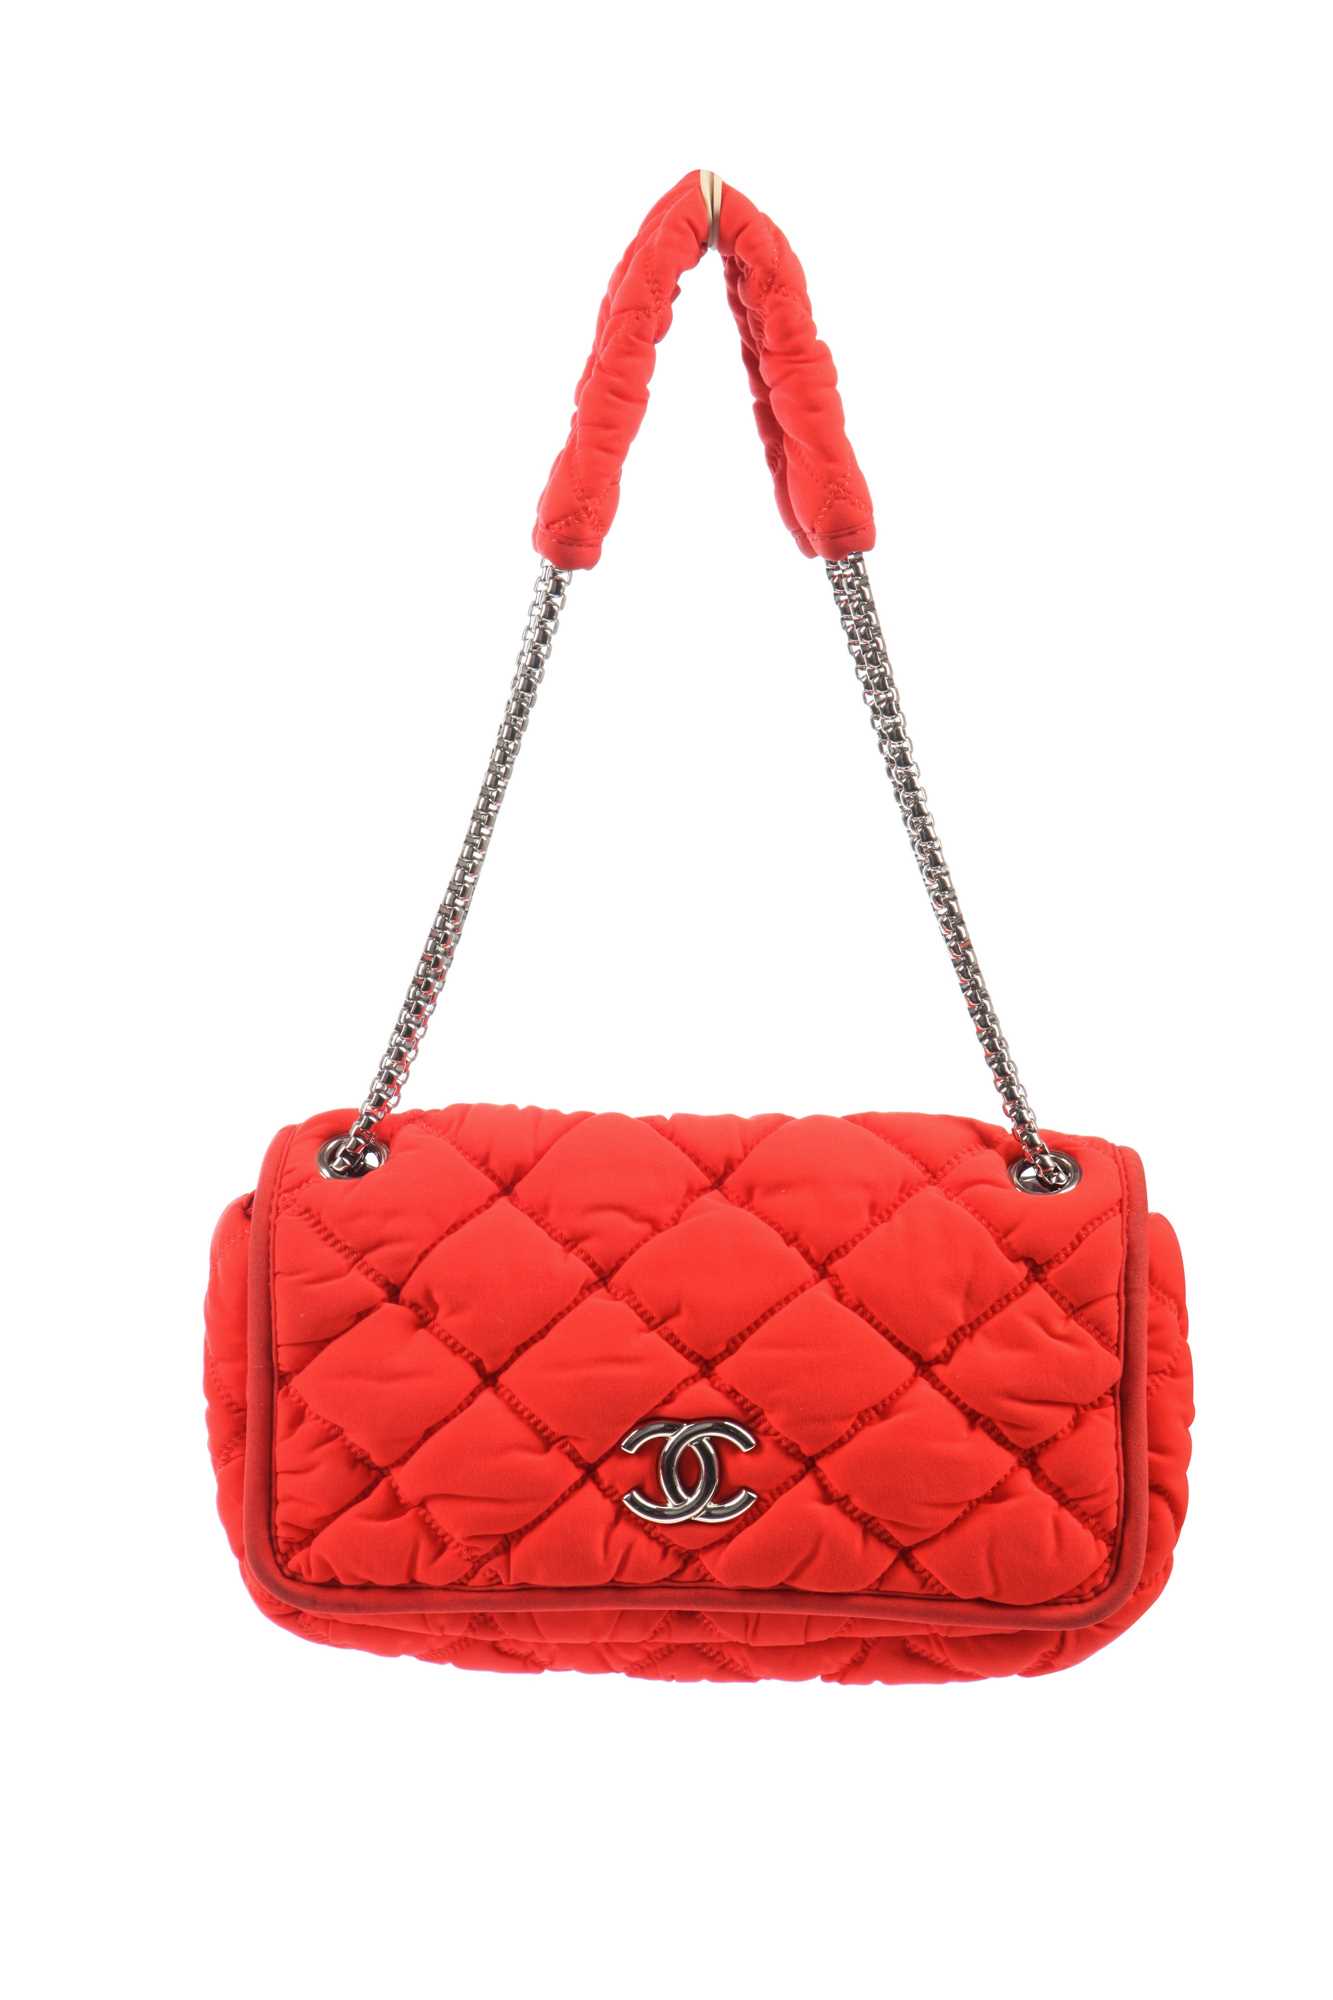 Lot 2 - A Chanel neon-orange jersey puffer-quilted flap bag, 2005-06